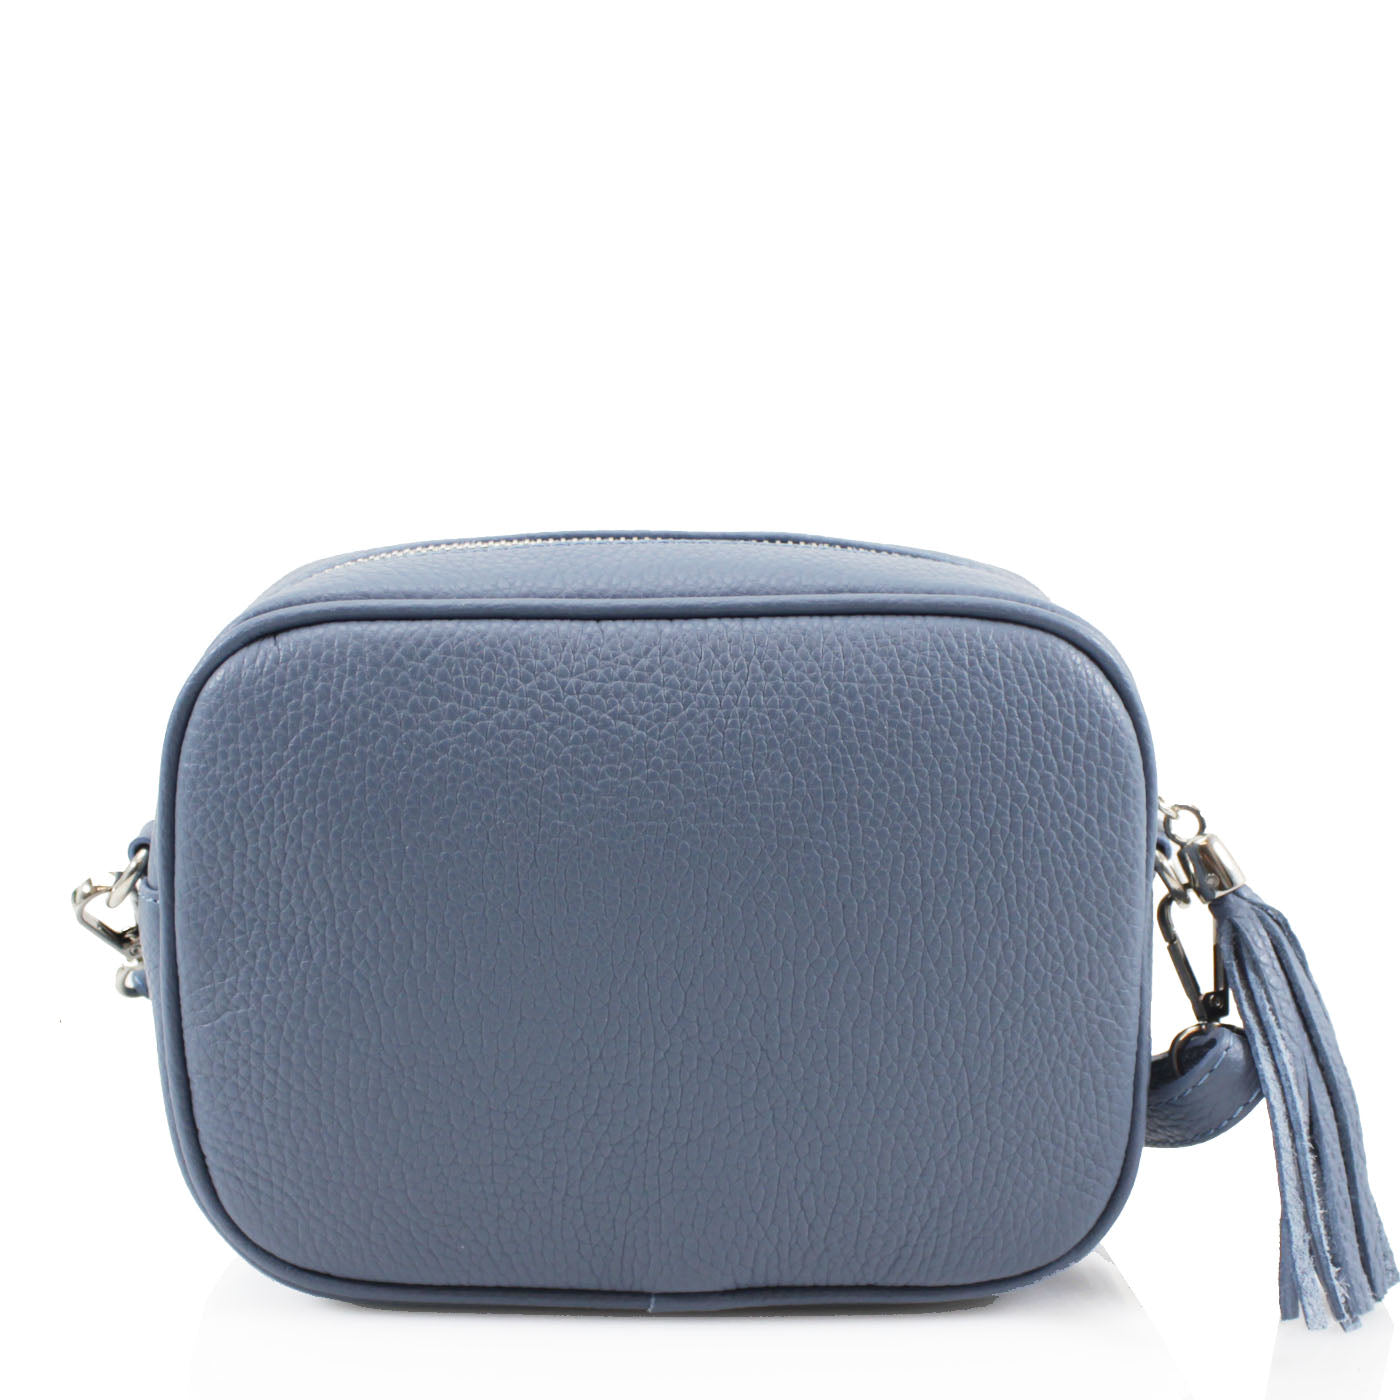 Genuine Italian Leather cross-body bag with tassel detail in airforce blue